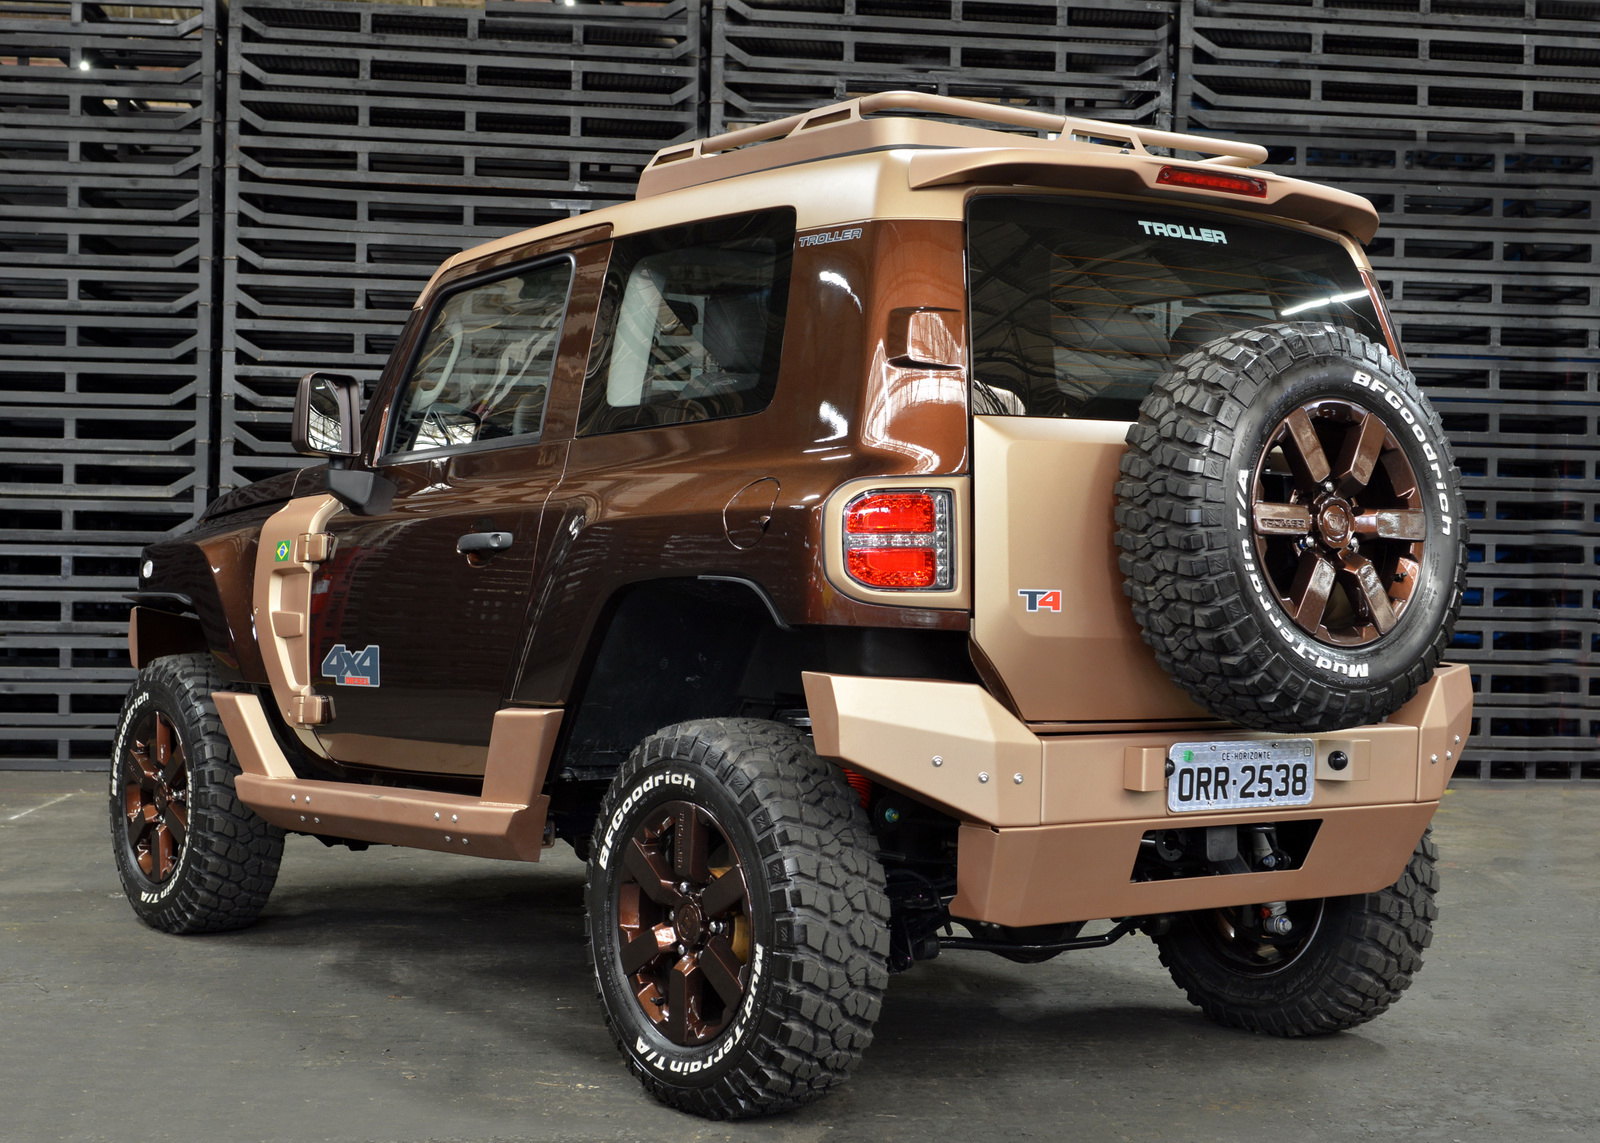 Troller Unveils Two T4Based Concepts at the Sao Paulo Auto Show